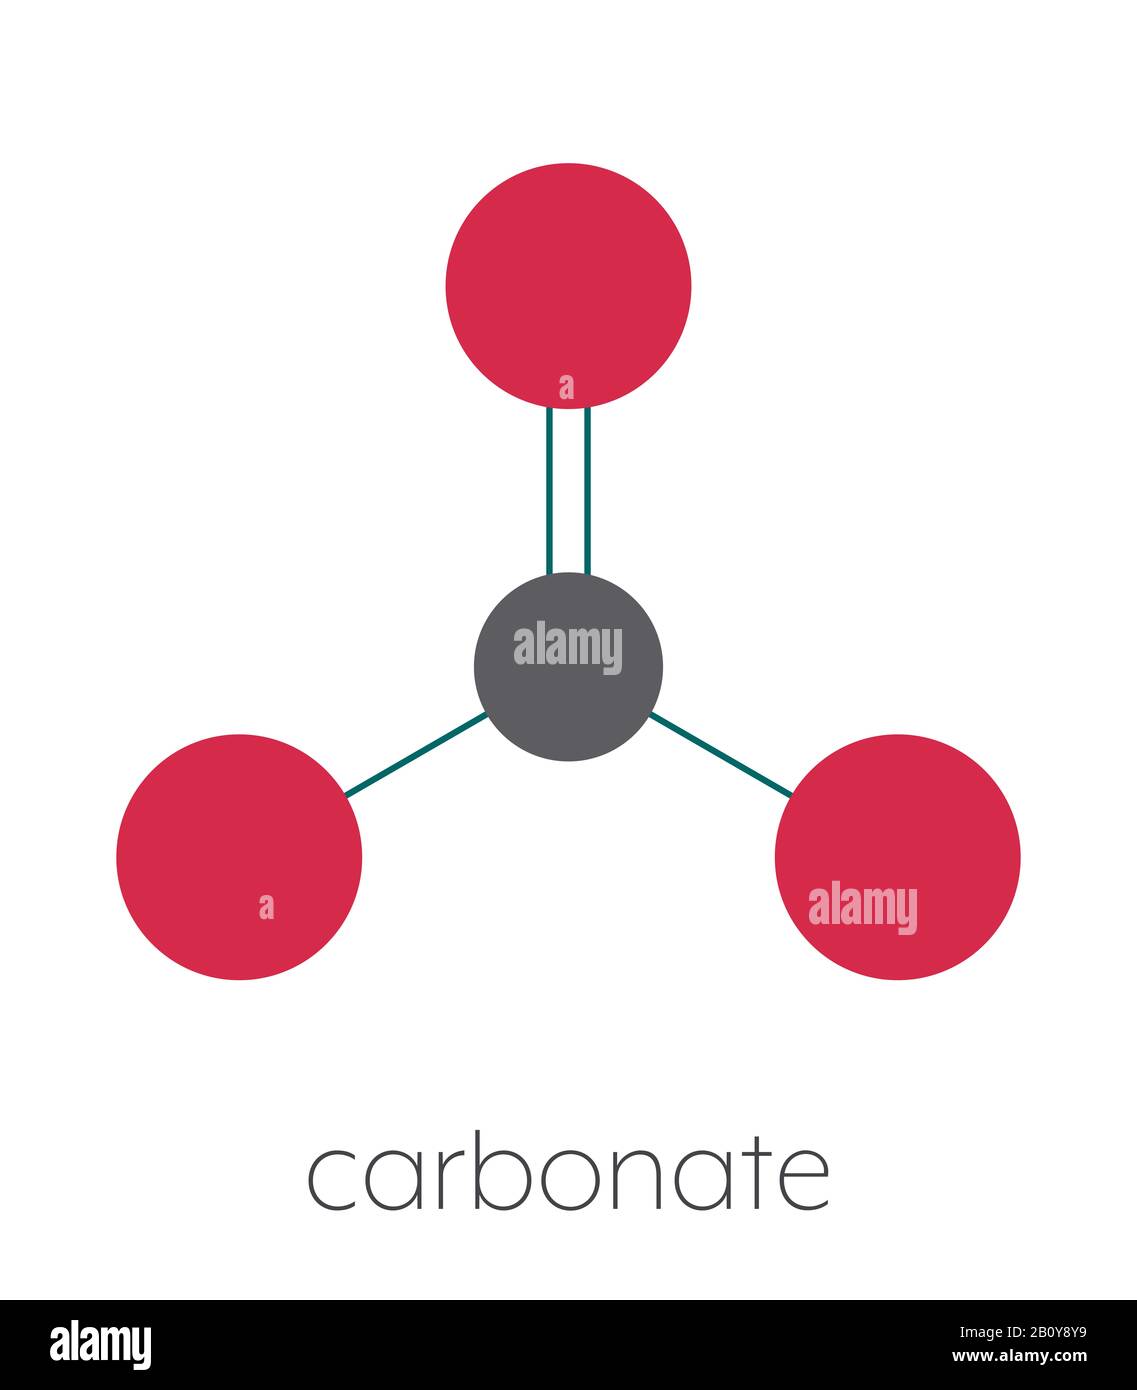 Carbonate anion chemical structure, illustration Stock Photo